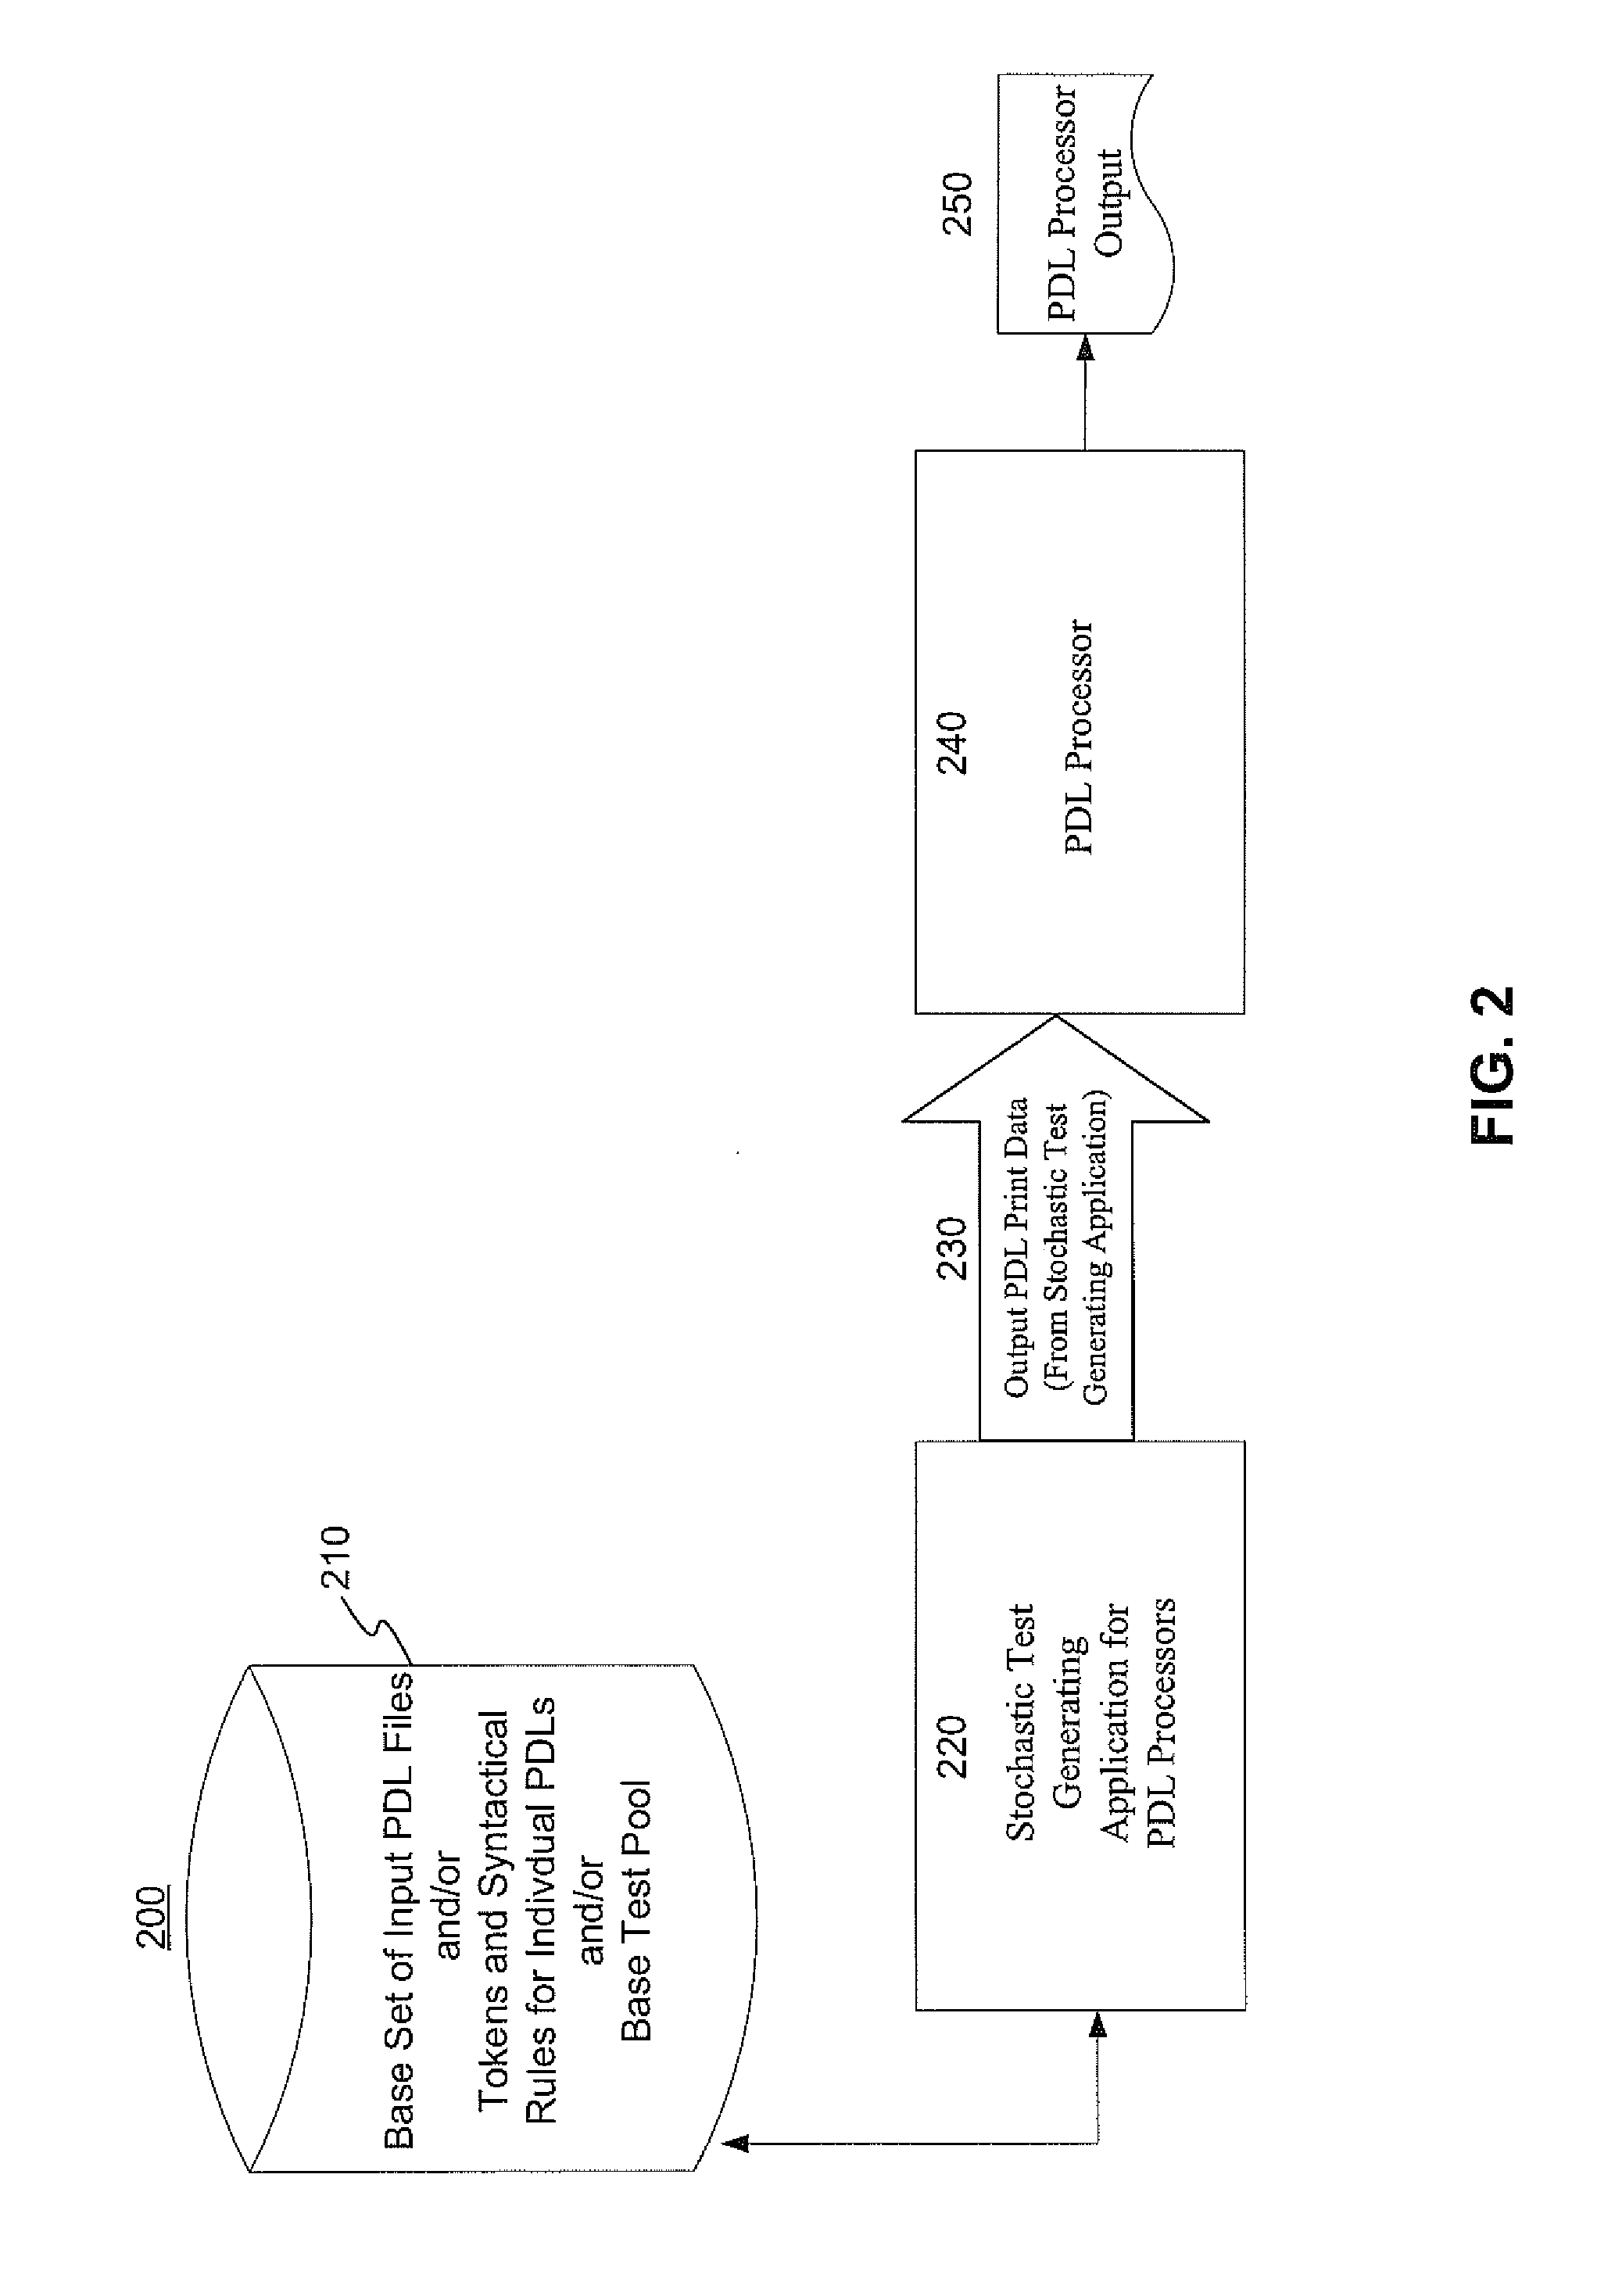 Systems and methods for stochastic regression testing of page description language processors